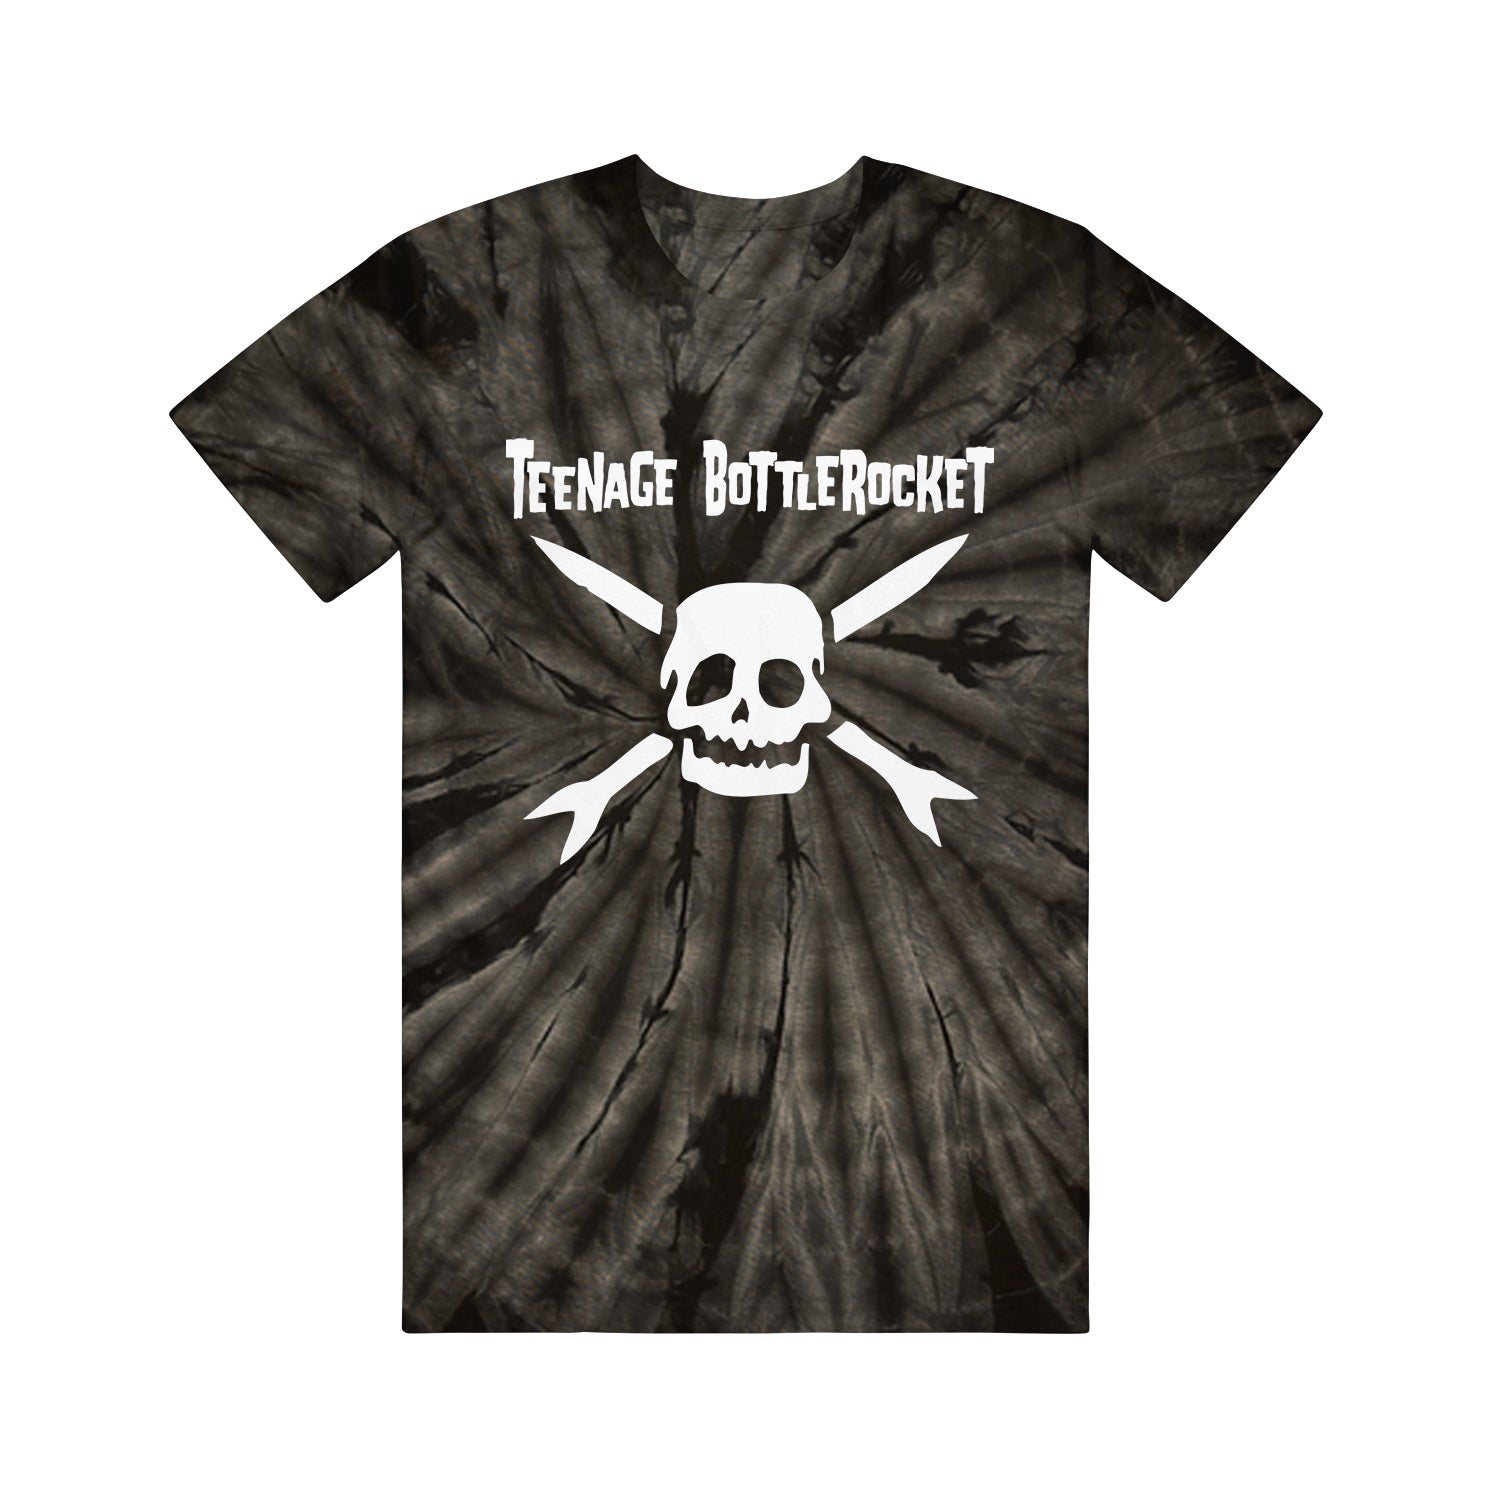 Image of a black tie dye tshirt against a white background. The center of the tshirt says teenage bottlerocket in white text across the chest. Below that is a white graphic of the teenage bottlerocket logo- a skull head with cross arrows.